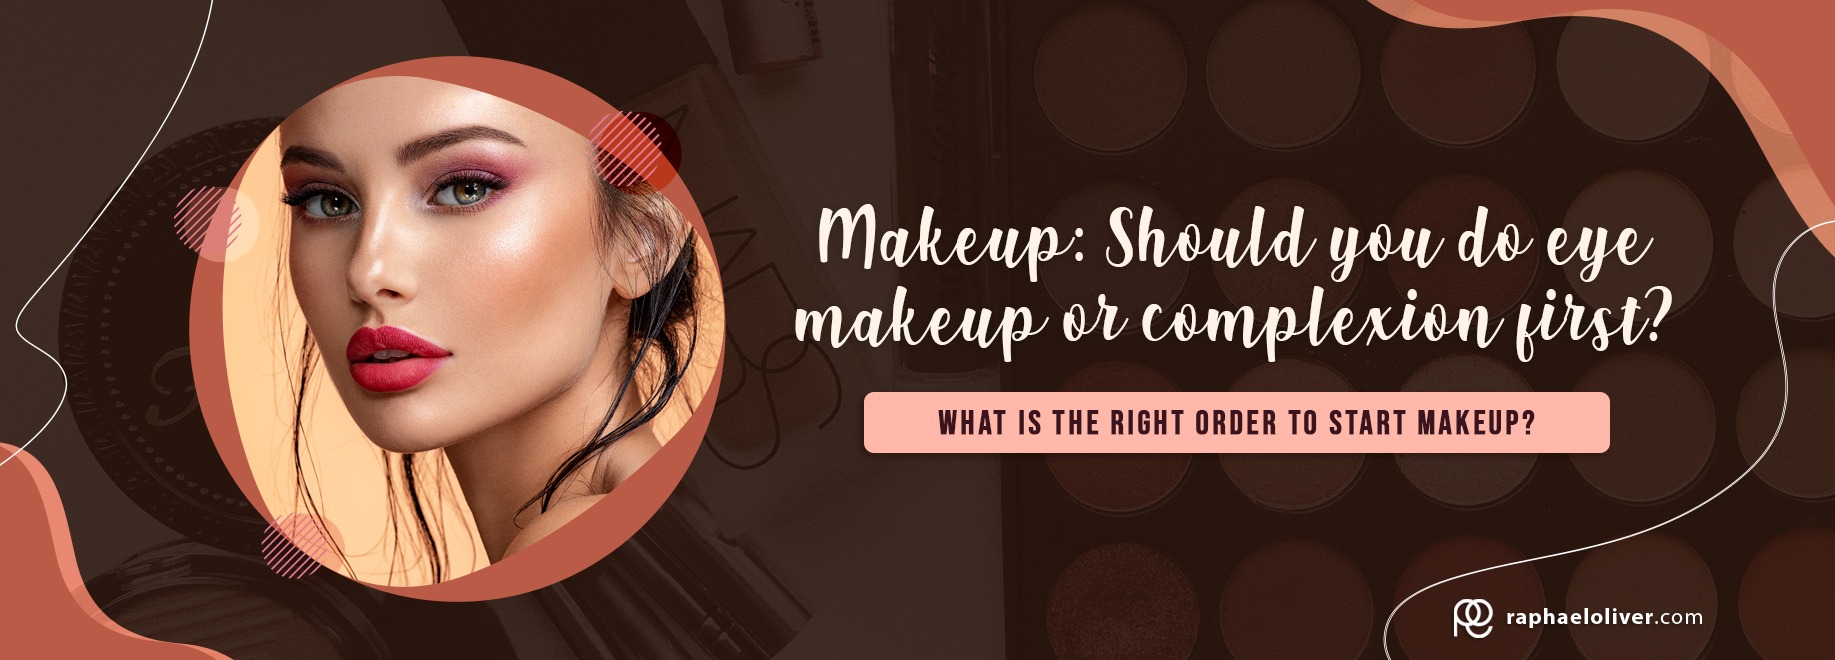 Makeup: Should you do eye makeup or complexion first?